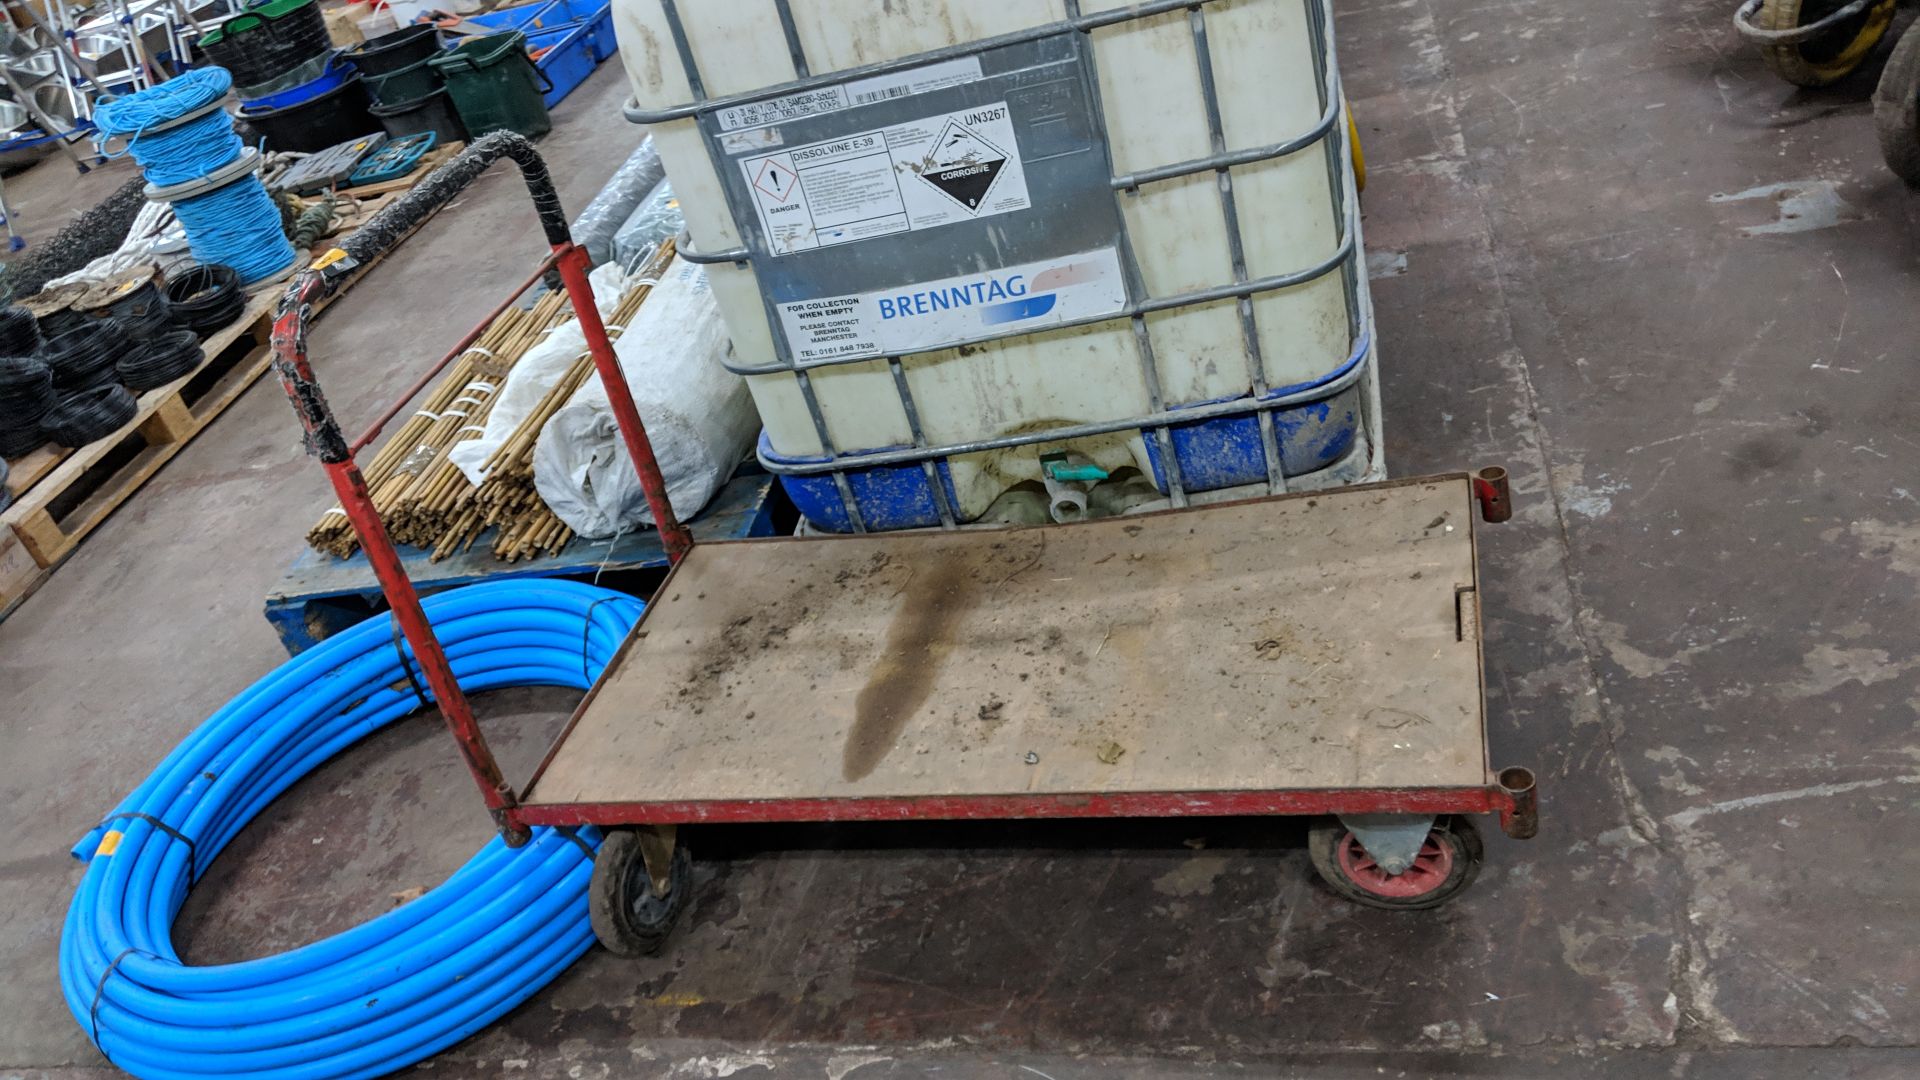 Flatbed trolley IMPORTANT: Please remember goods successfully bid upon must be paid for and